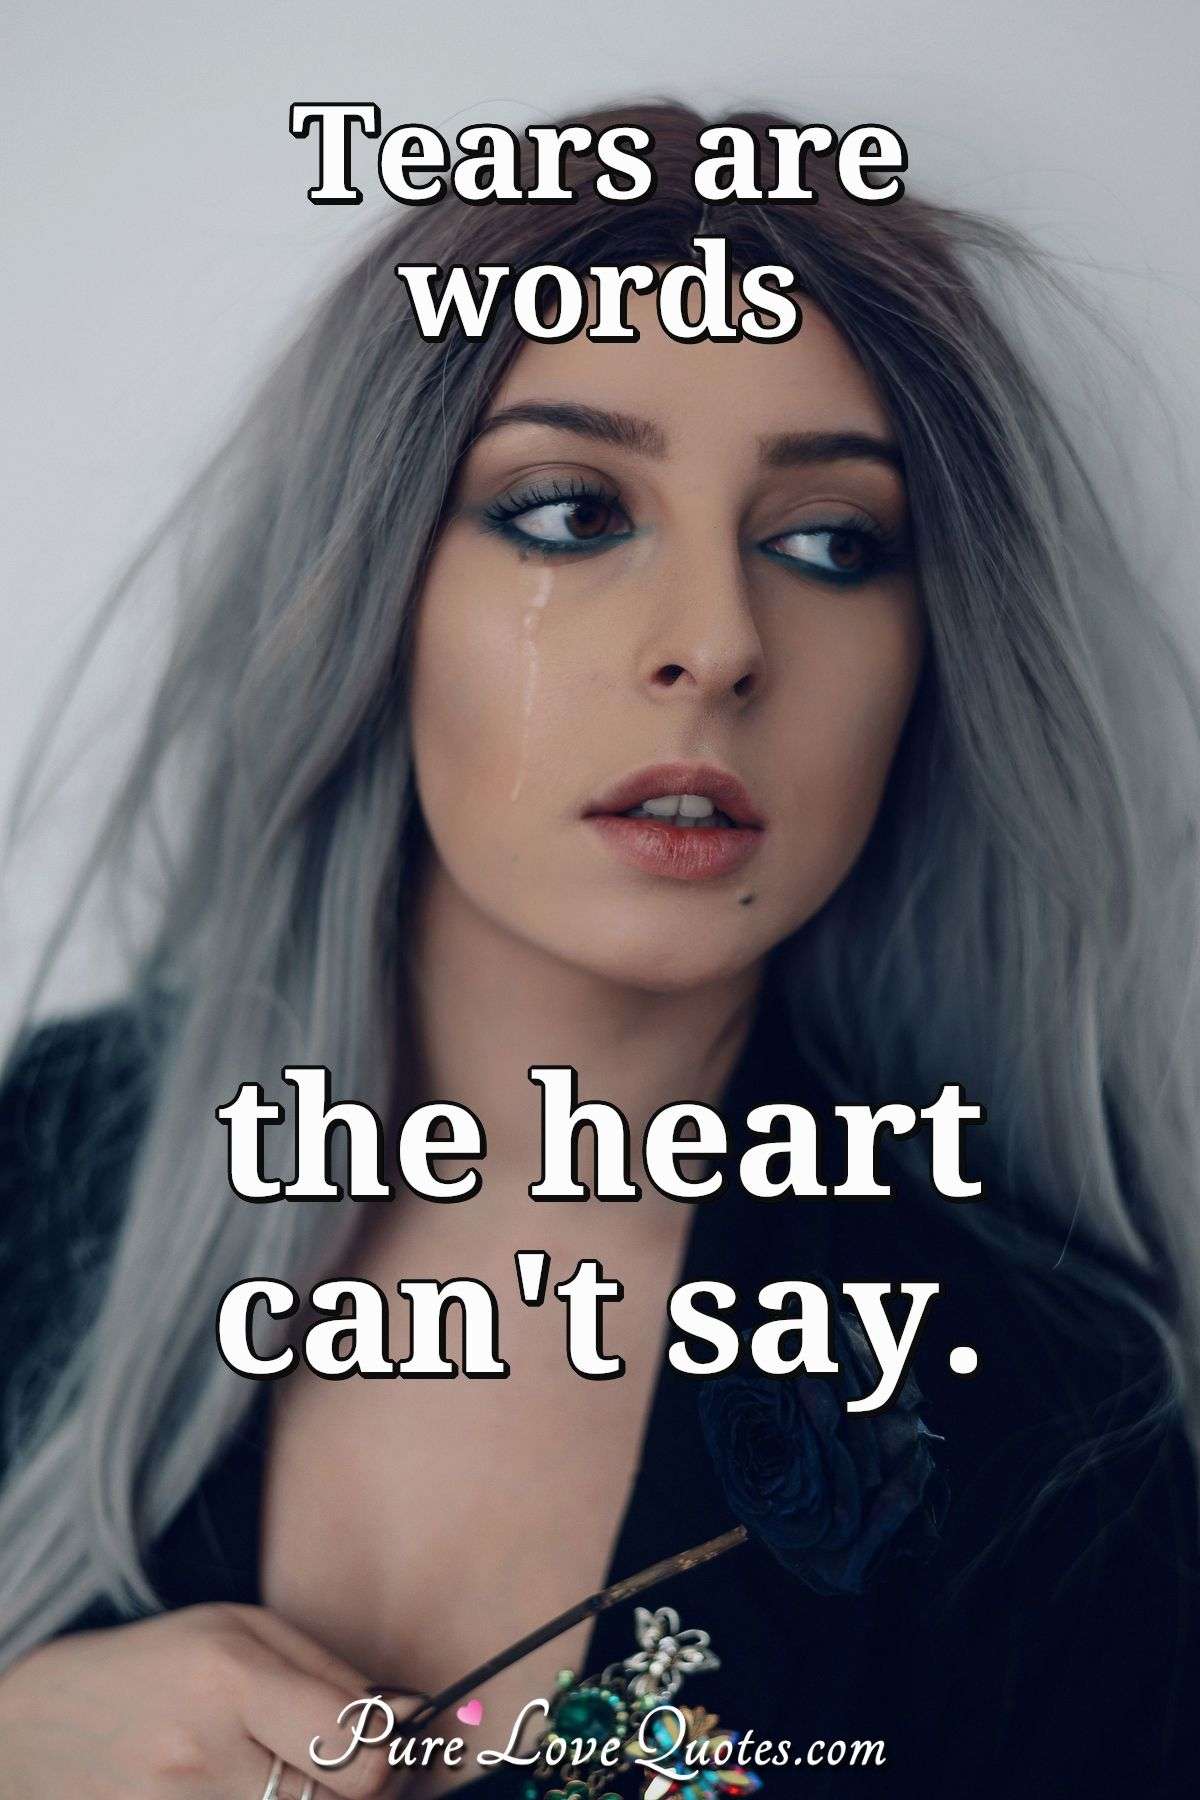 Tears are words the heart can't say. - Anonymous